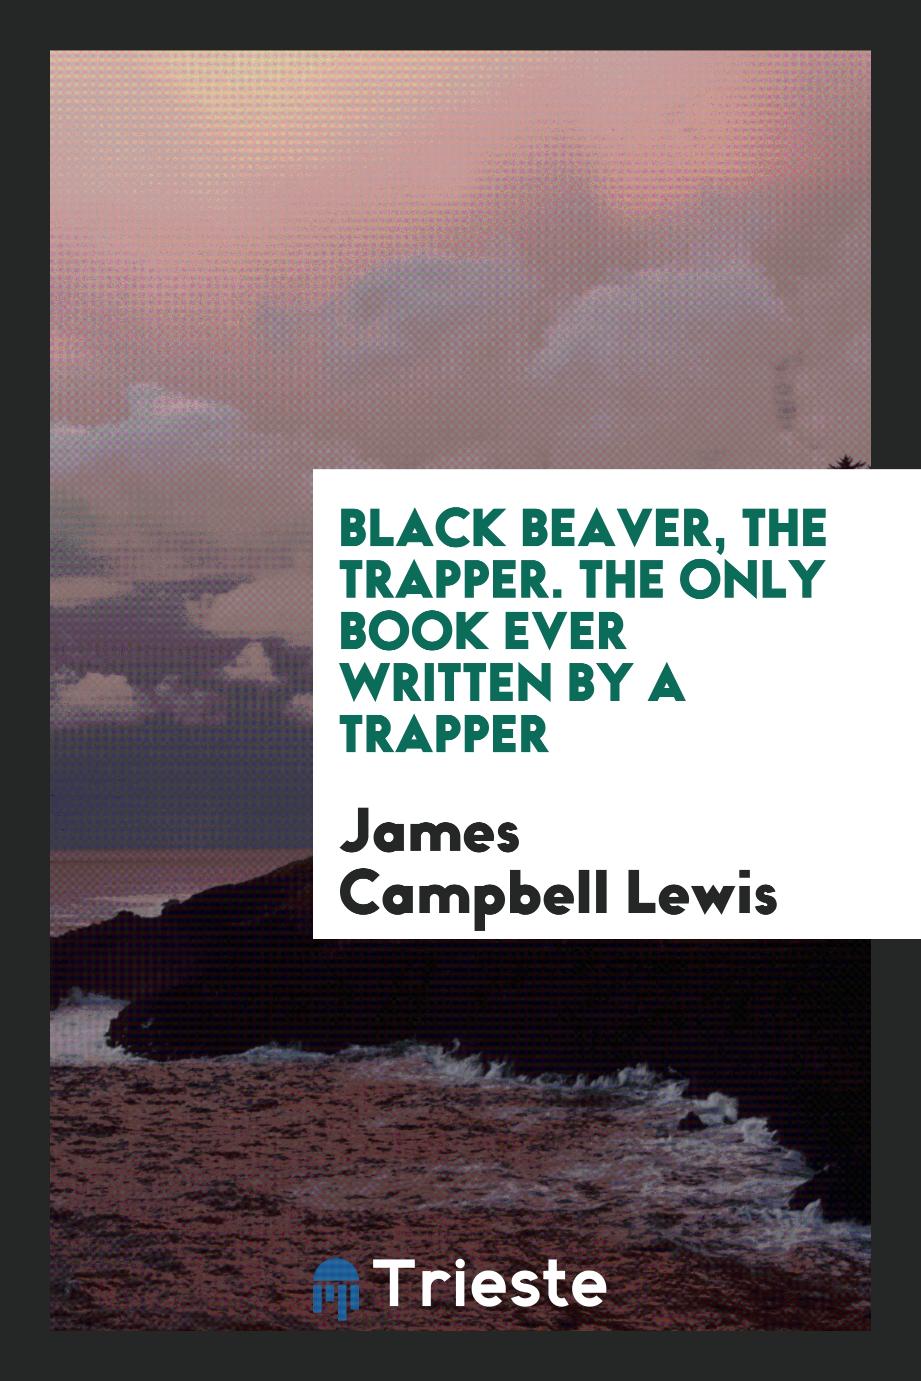 Black Beaver, the Trapper. The Only Book Ever Written by a Trapper